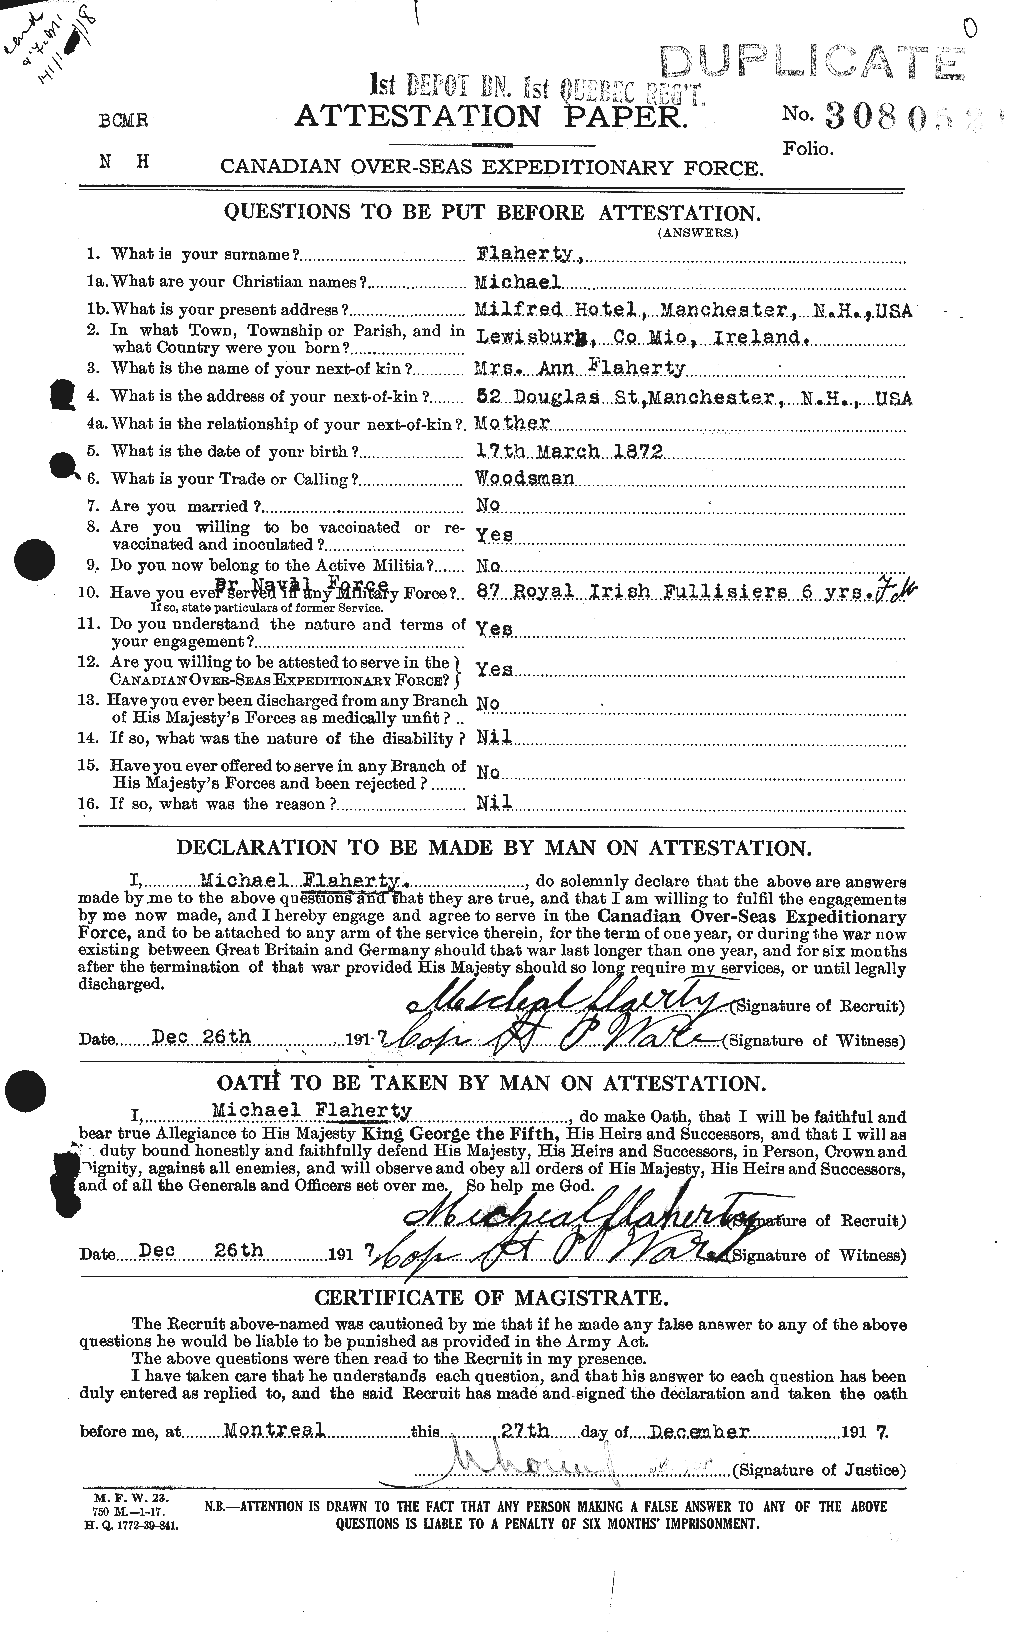 Personnel Records of the First World War - CEF 323373a